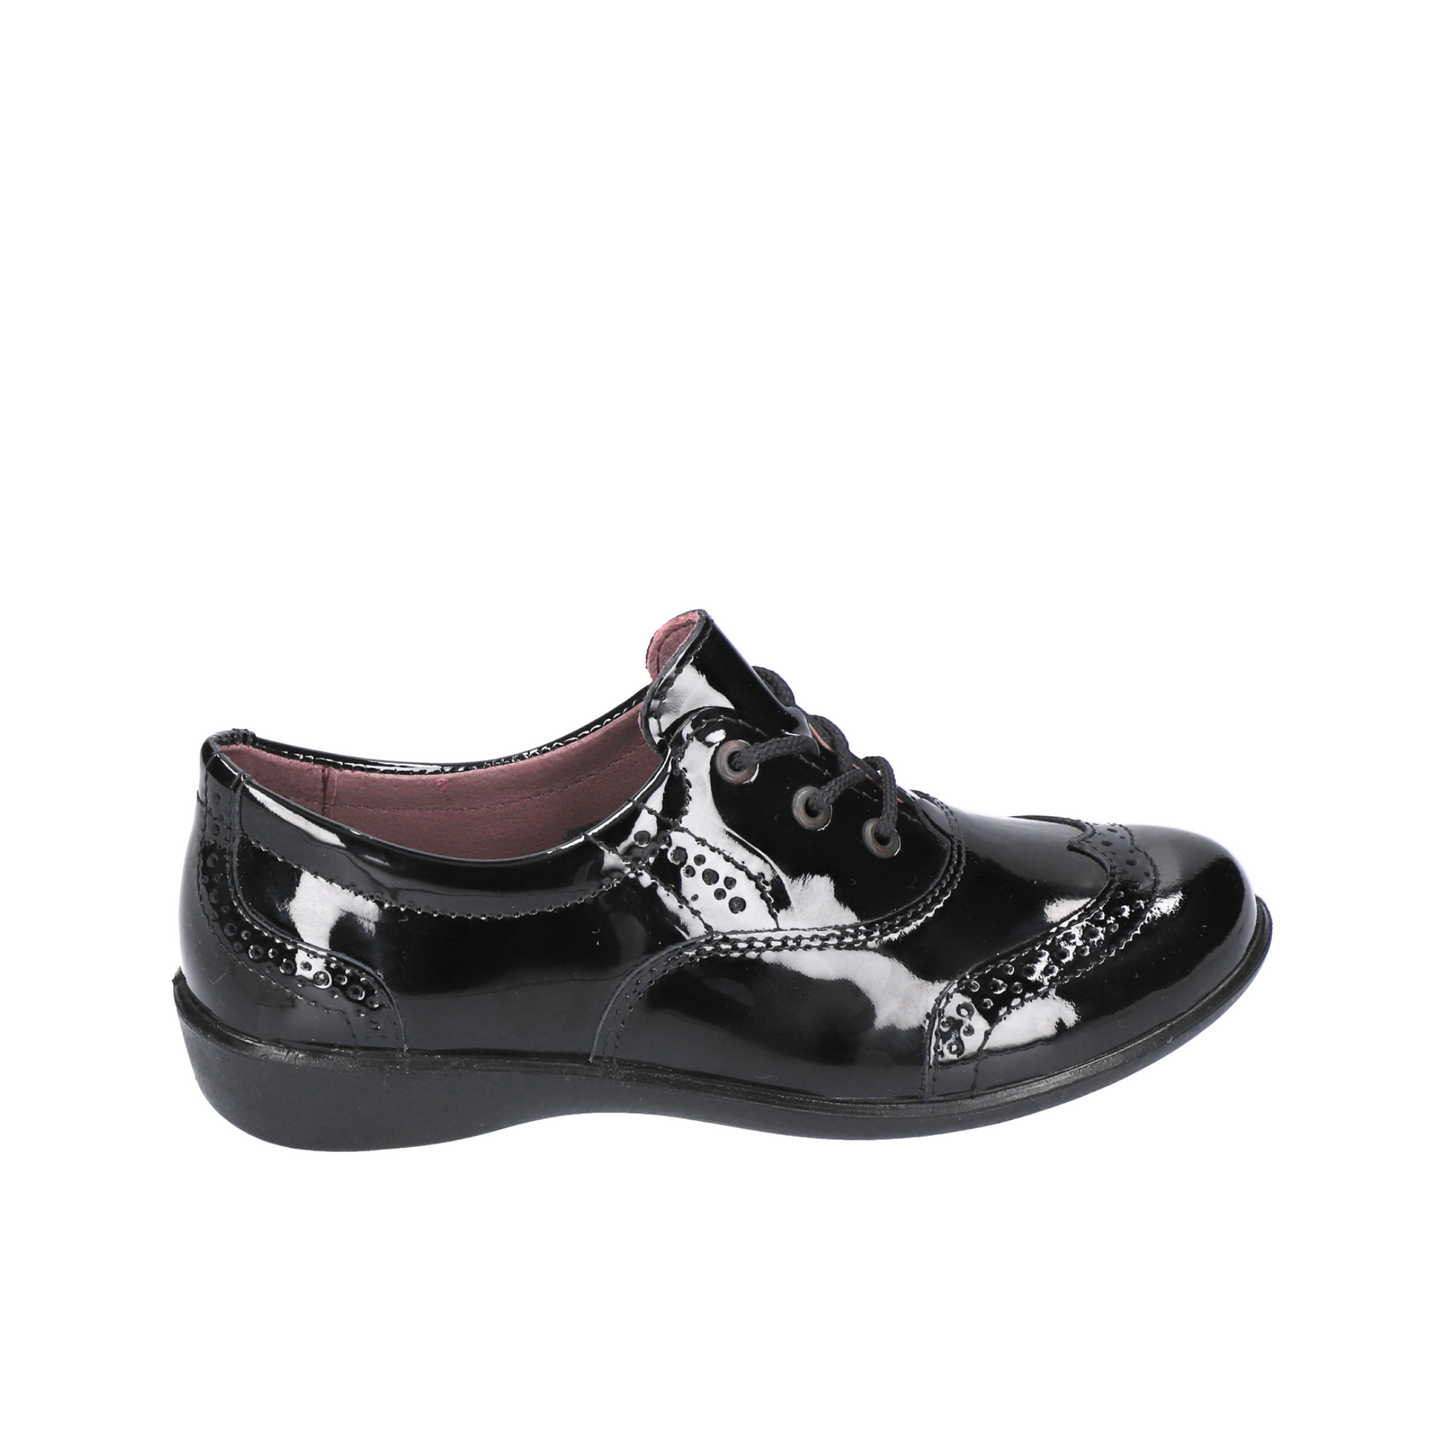 Kate Black Patent Leather Lace-up Girls School Shoe